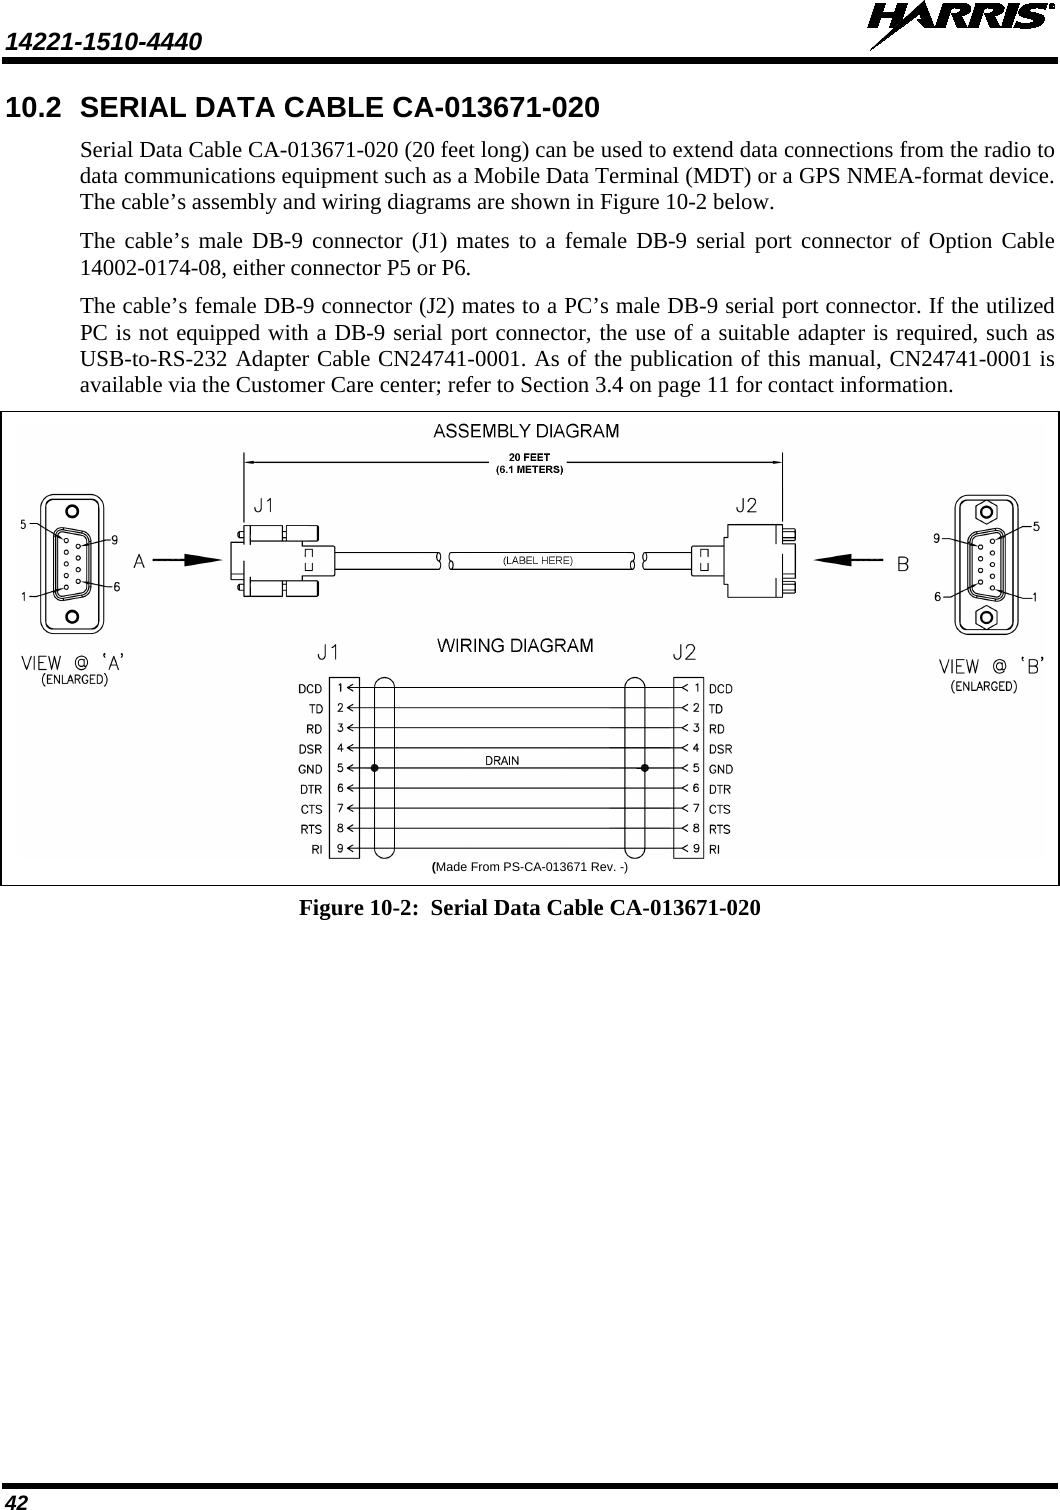 14221-1510-4440   42 10.2 SERIAL DATA CABLE CA-013671-020 Serial Data Cable CA-013671-020 (20 feet long) can be used to extend data connections from the radio to data communications equipment such as a Mobile Data Terminal (MDT) or a GPS NMEA-format device. The cable’s assembly and wiring diagrams are shown in Figure 10-2 below. The cable’s male DB-9 connector (J1) mates to  a  female DB-9 serial port connector of Option Cable 14002-0174-08, either connector P5 or P6. The cable’s female DB-9 connector (J2) mates to a PC’s male DB-9 serial port connector. If the utilized PC is not equipped with a DB-9 serial port connector, the use of a suitable adapter is required, such as USB-to-RS-232 Adapter Cable CN24741-0001. As of the publication of this manual, CN24741-0001 is available via the Customer Care center; refer to Section 3.4 on page 11 for contact information.  (Made From PS-CA-013671 Rev. -) Figure 10-2:  Serial Data Cable CA-013671-020  